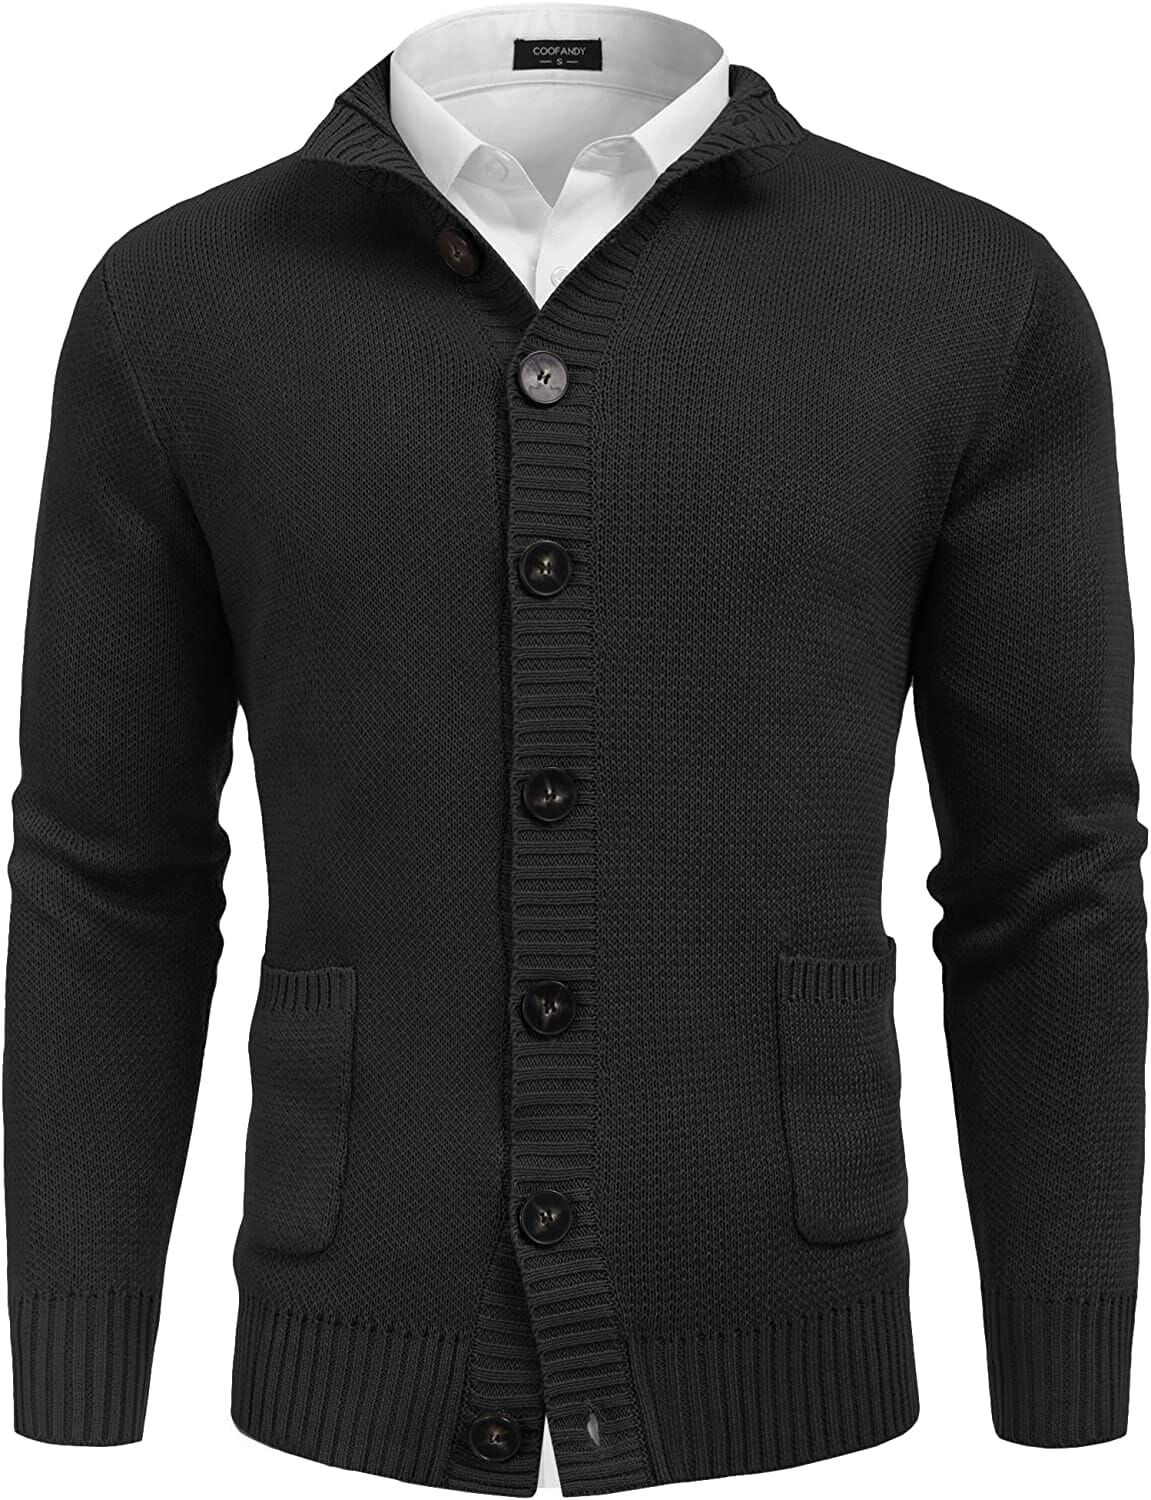 Stand Collar Button Down Knitted Cardigan with Pockets (US Only) Cardigans COOFANDY Store Black S 